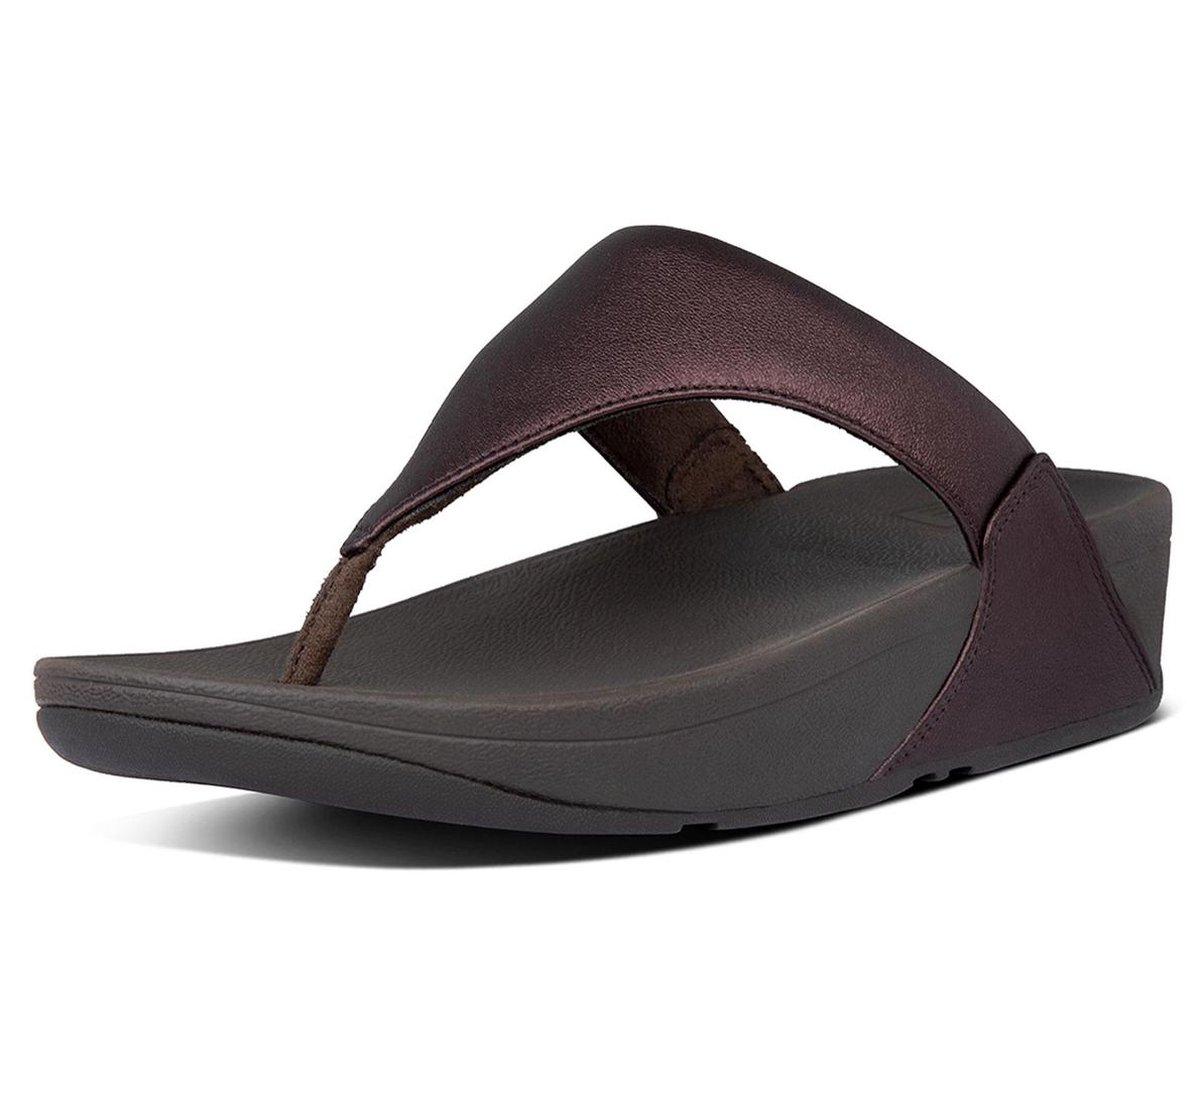 Fitflop Slippers - Maat 38 - Vrouwen - bordeaux rood | bol.com